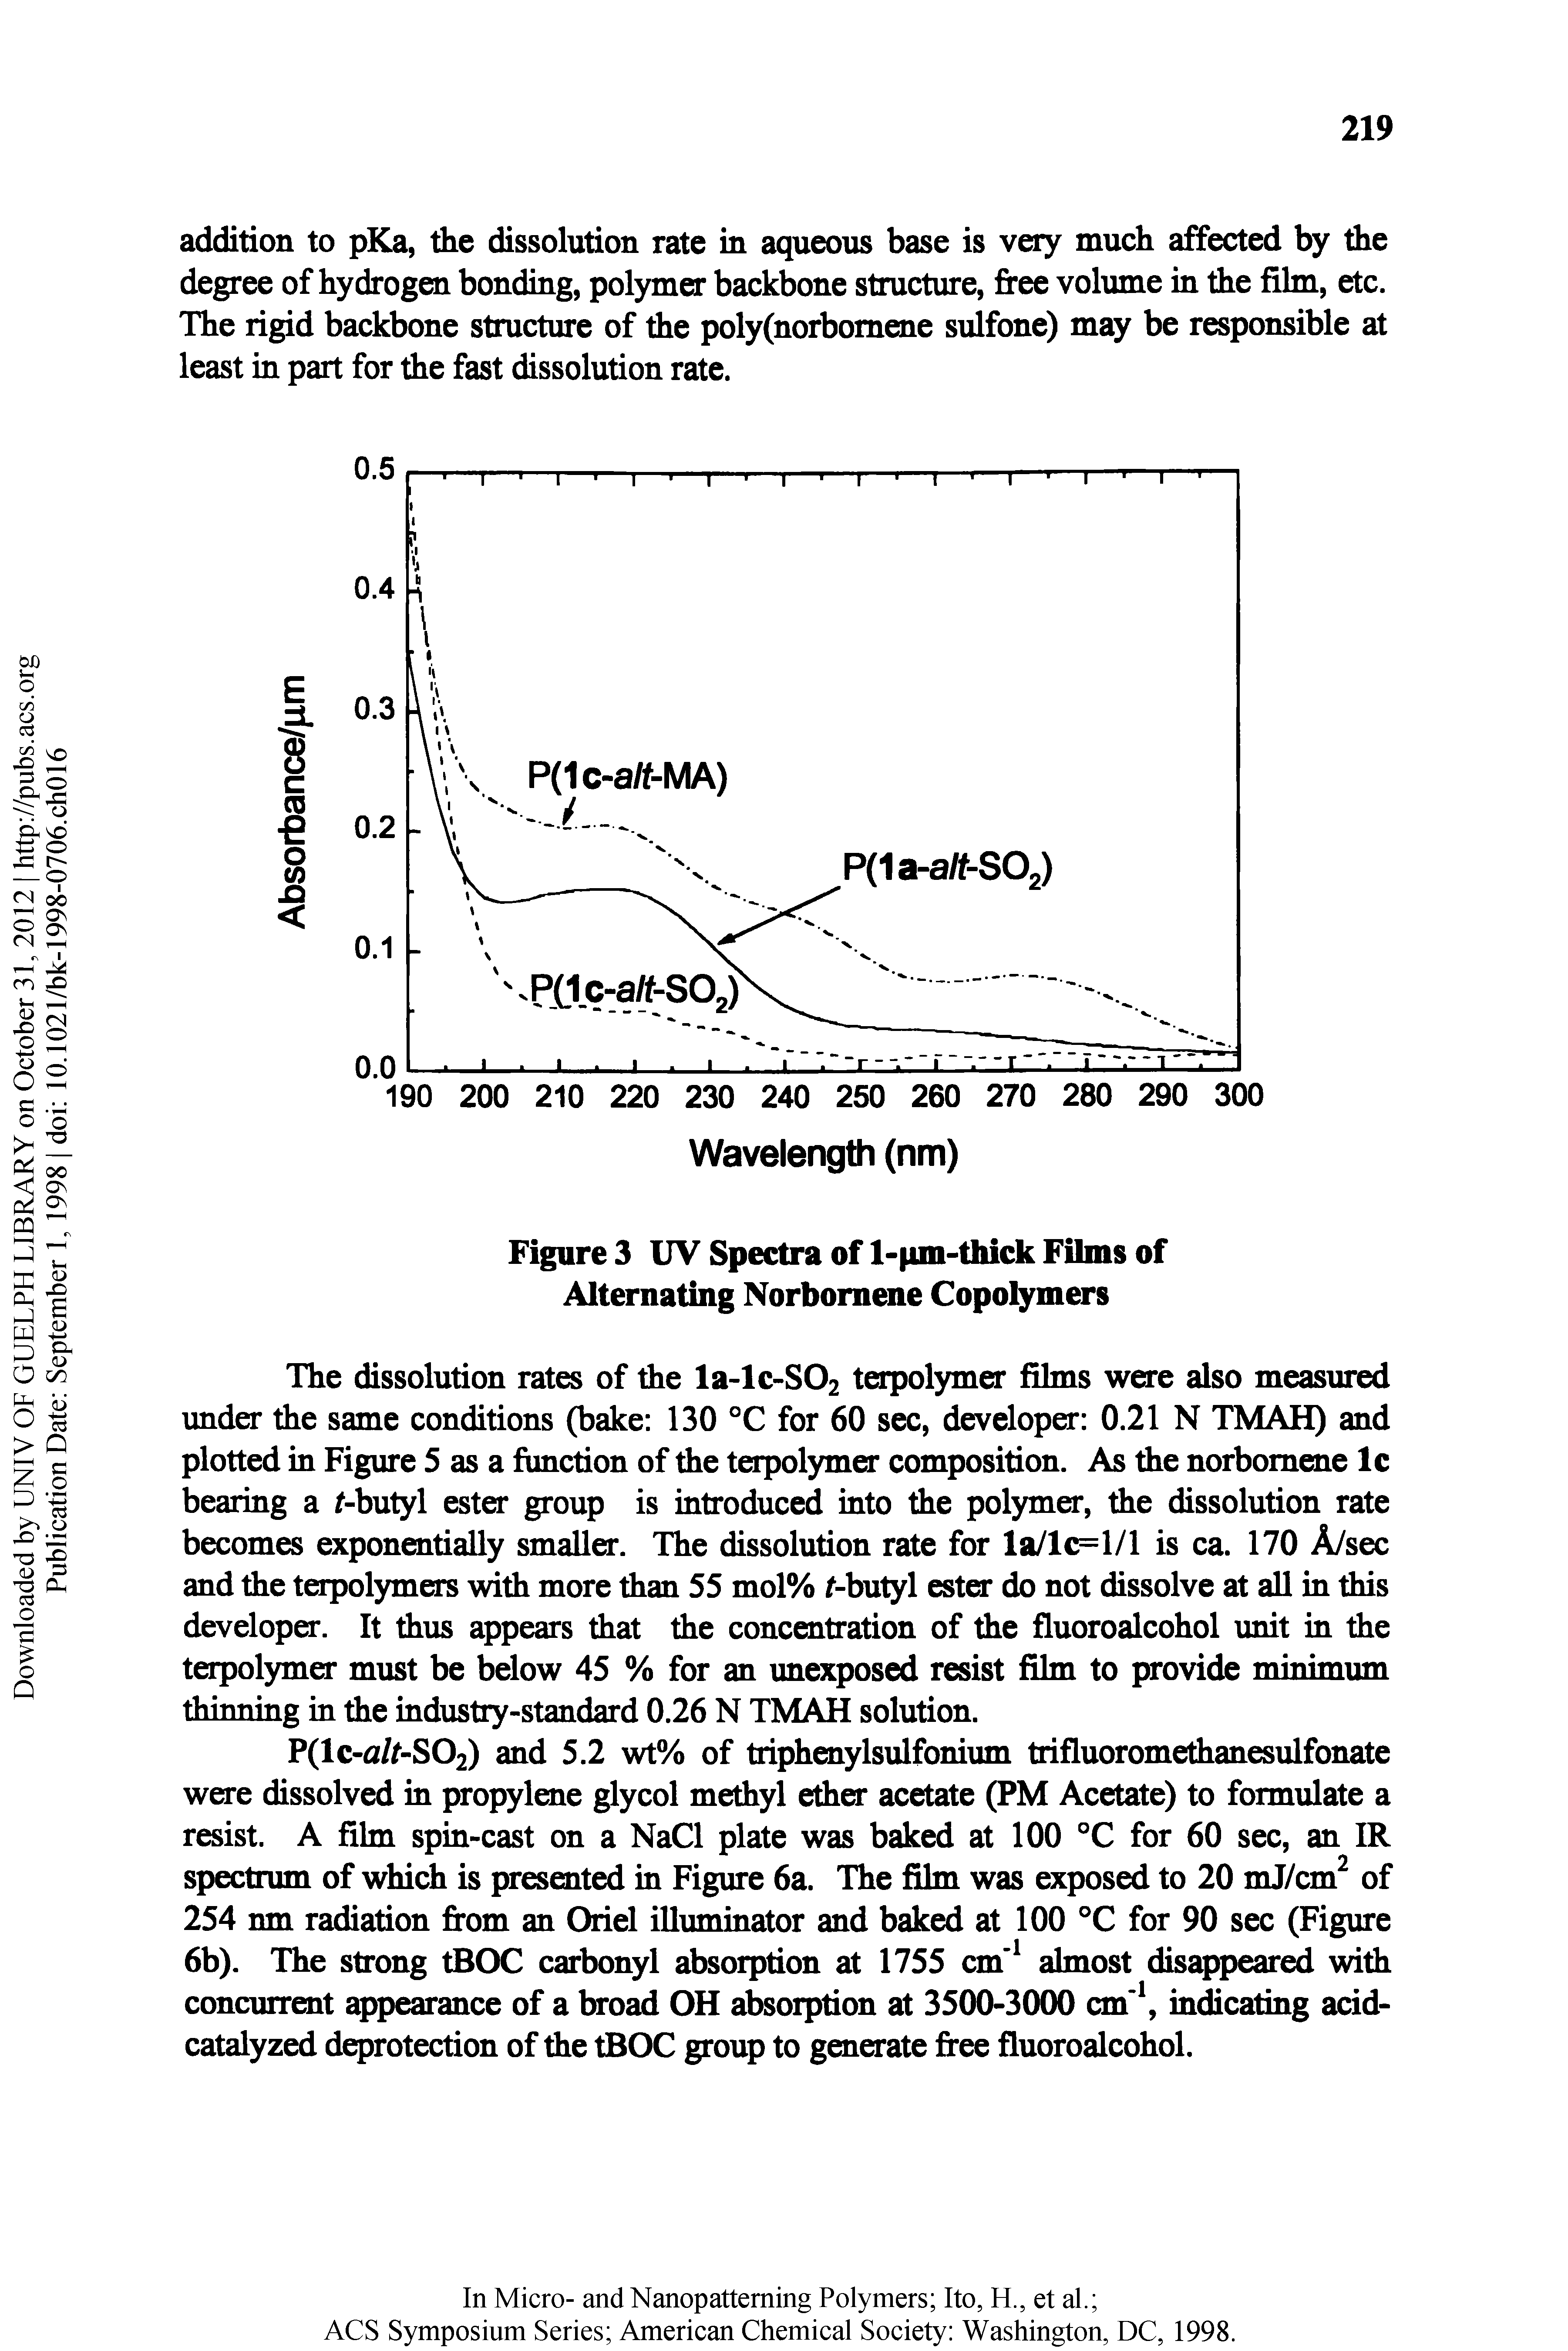 Figure 3 UV Spectra of l-pm-thick Films of Alternating Norbomene Copolymers...